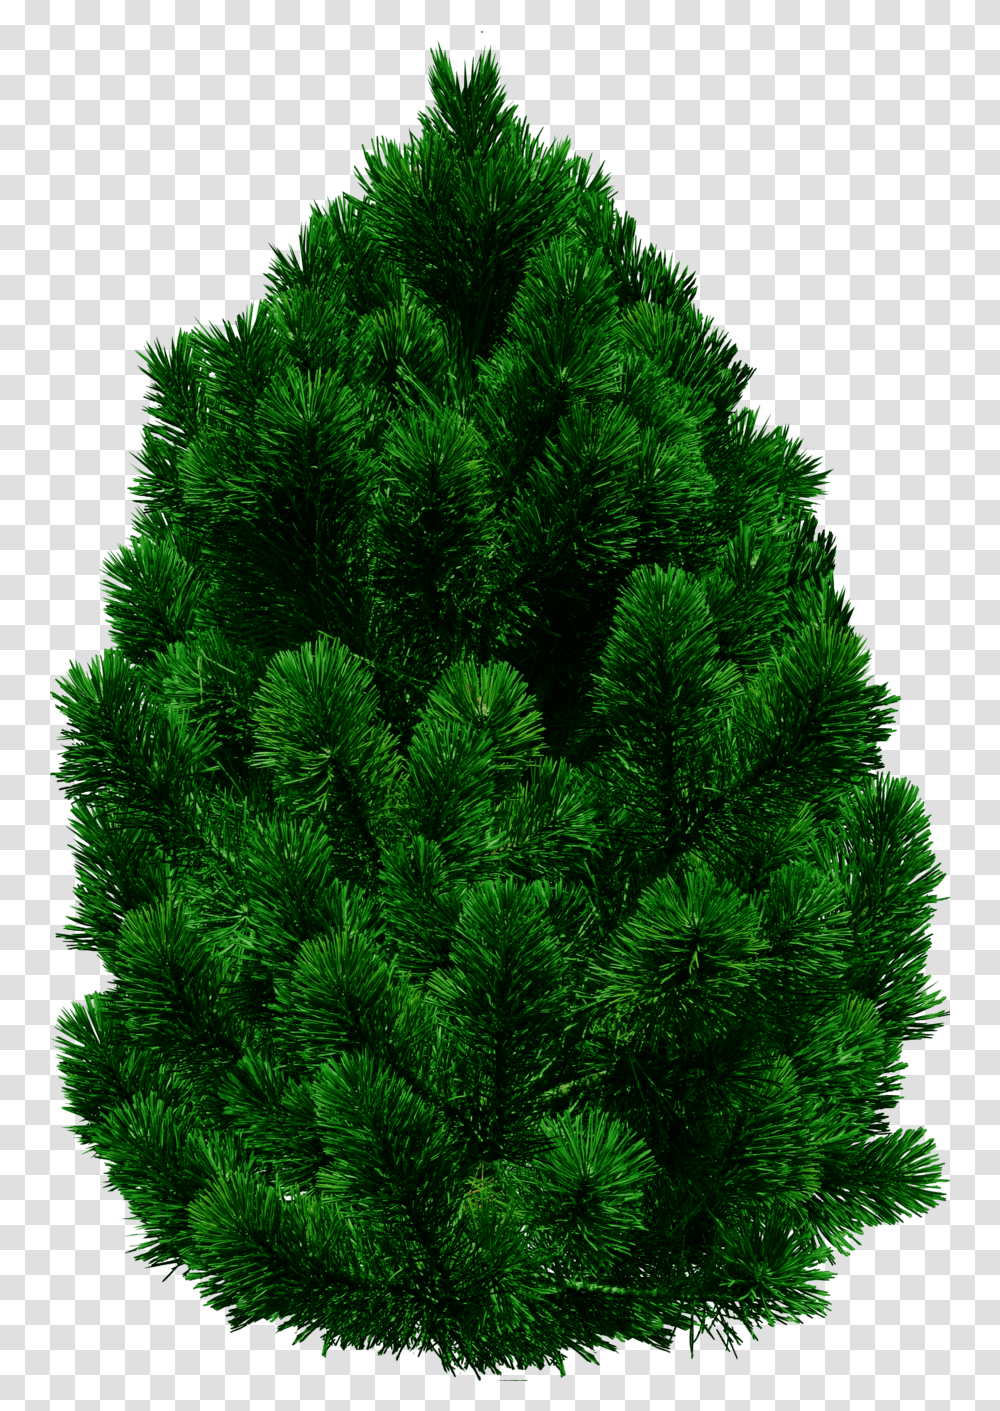 Tree Images Are Free To Download Tree Image In, Plant, Pine, Christmas Tree, Ornament Transparent Png